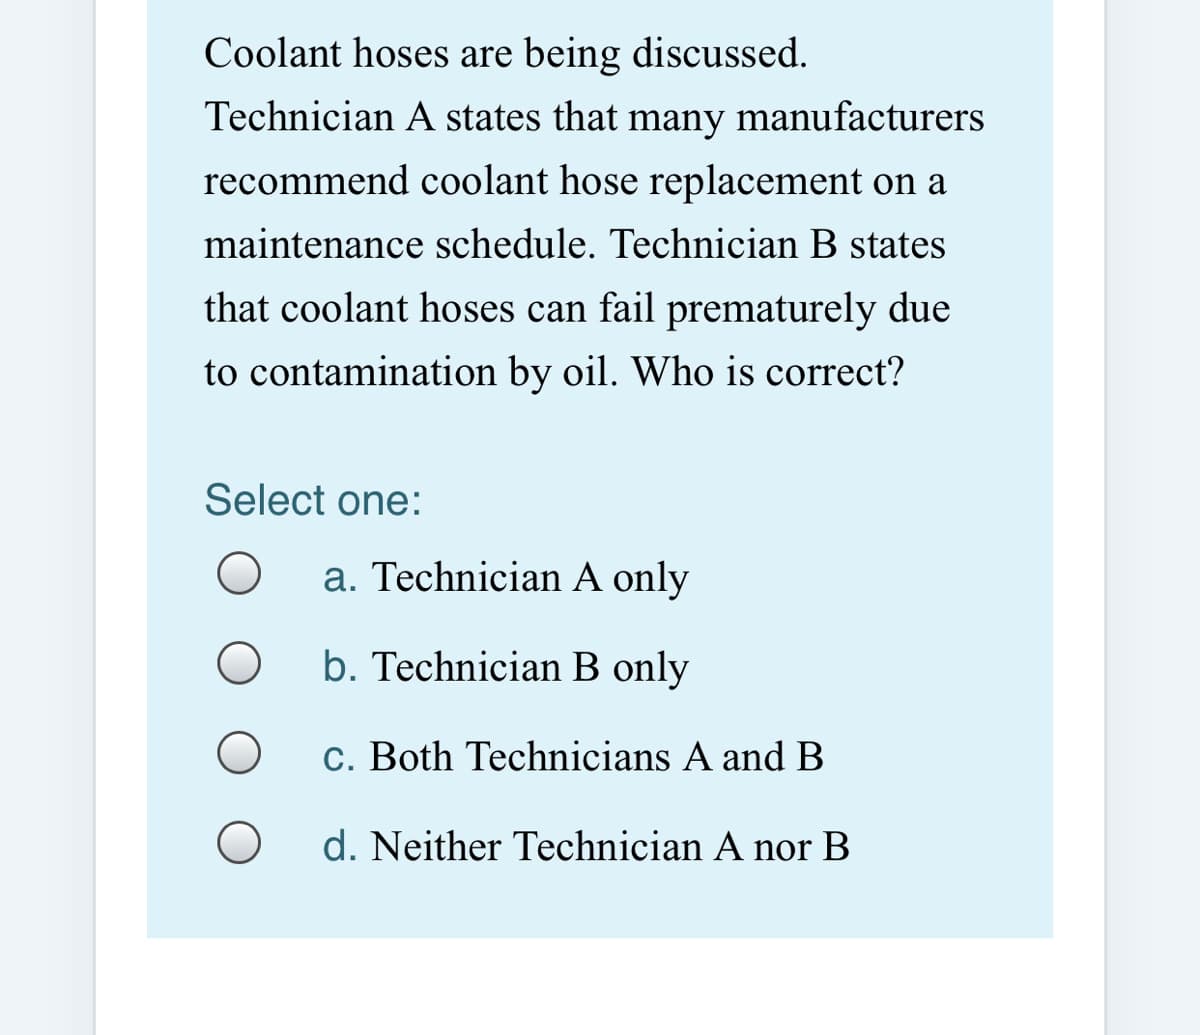 Coolant hoses are being discussed.
Technician A states that
many
manufacturers
recommend coolant hose replacement on a
maintenance schedule. Technician B states
that coolant hoses can fail prematurely due
to contamination by oil. Who is correct?
Select one:
a. Technician A only
b. Technician B only
c. Both Technicians A and B
d. Neither Technician A nor B
